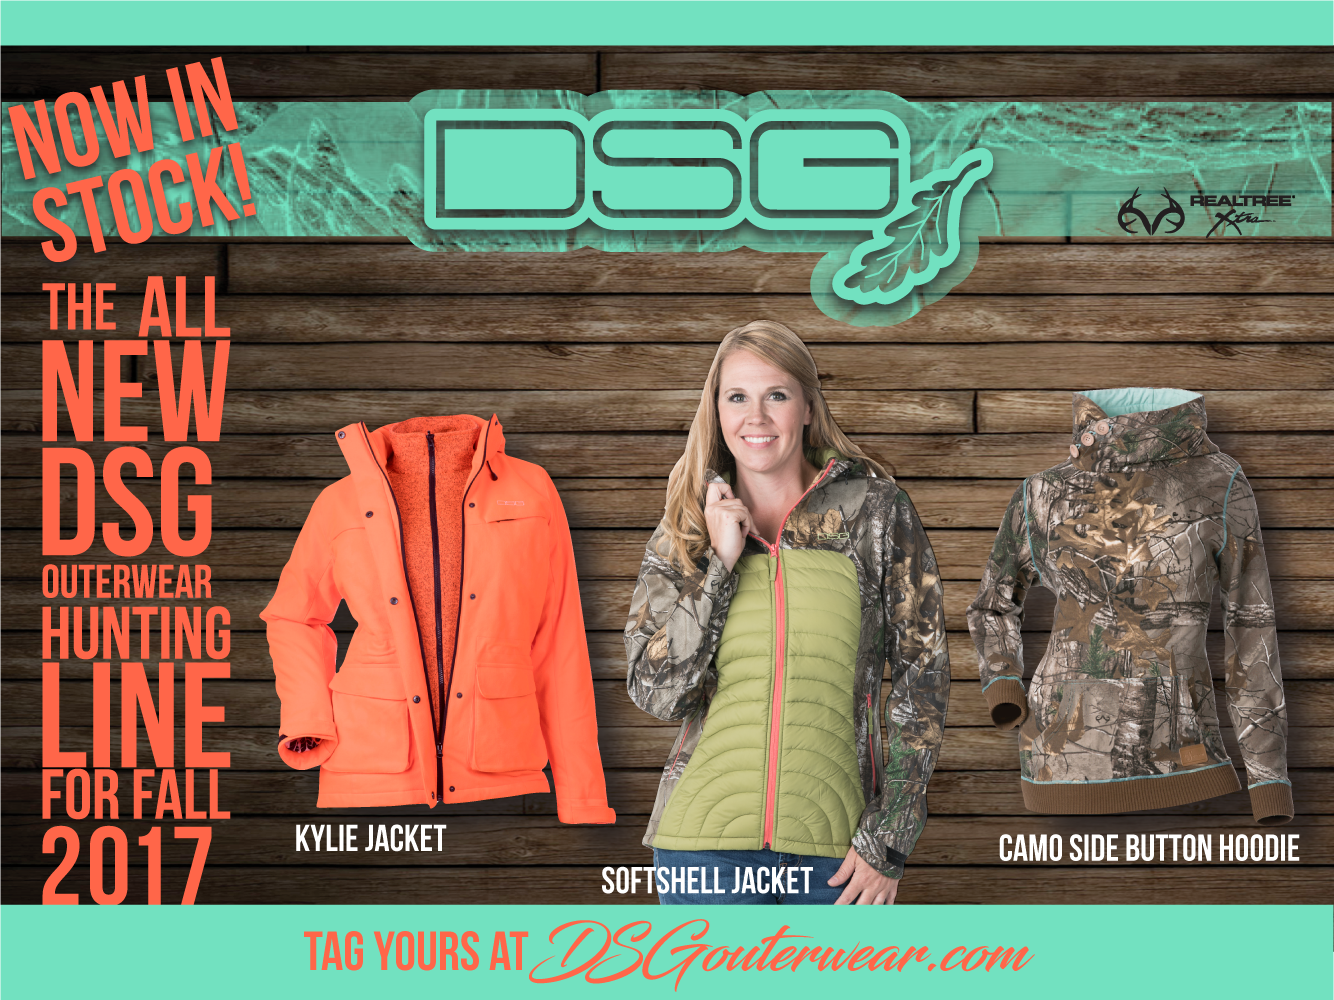 Ice - Base and Mid Layers - Tops - DSG Outerwear